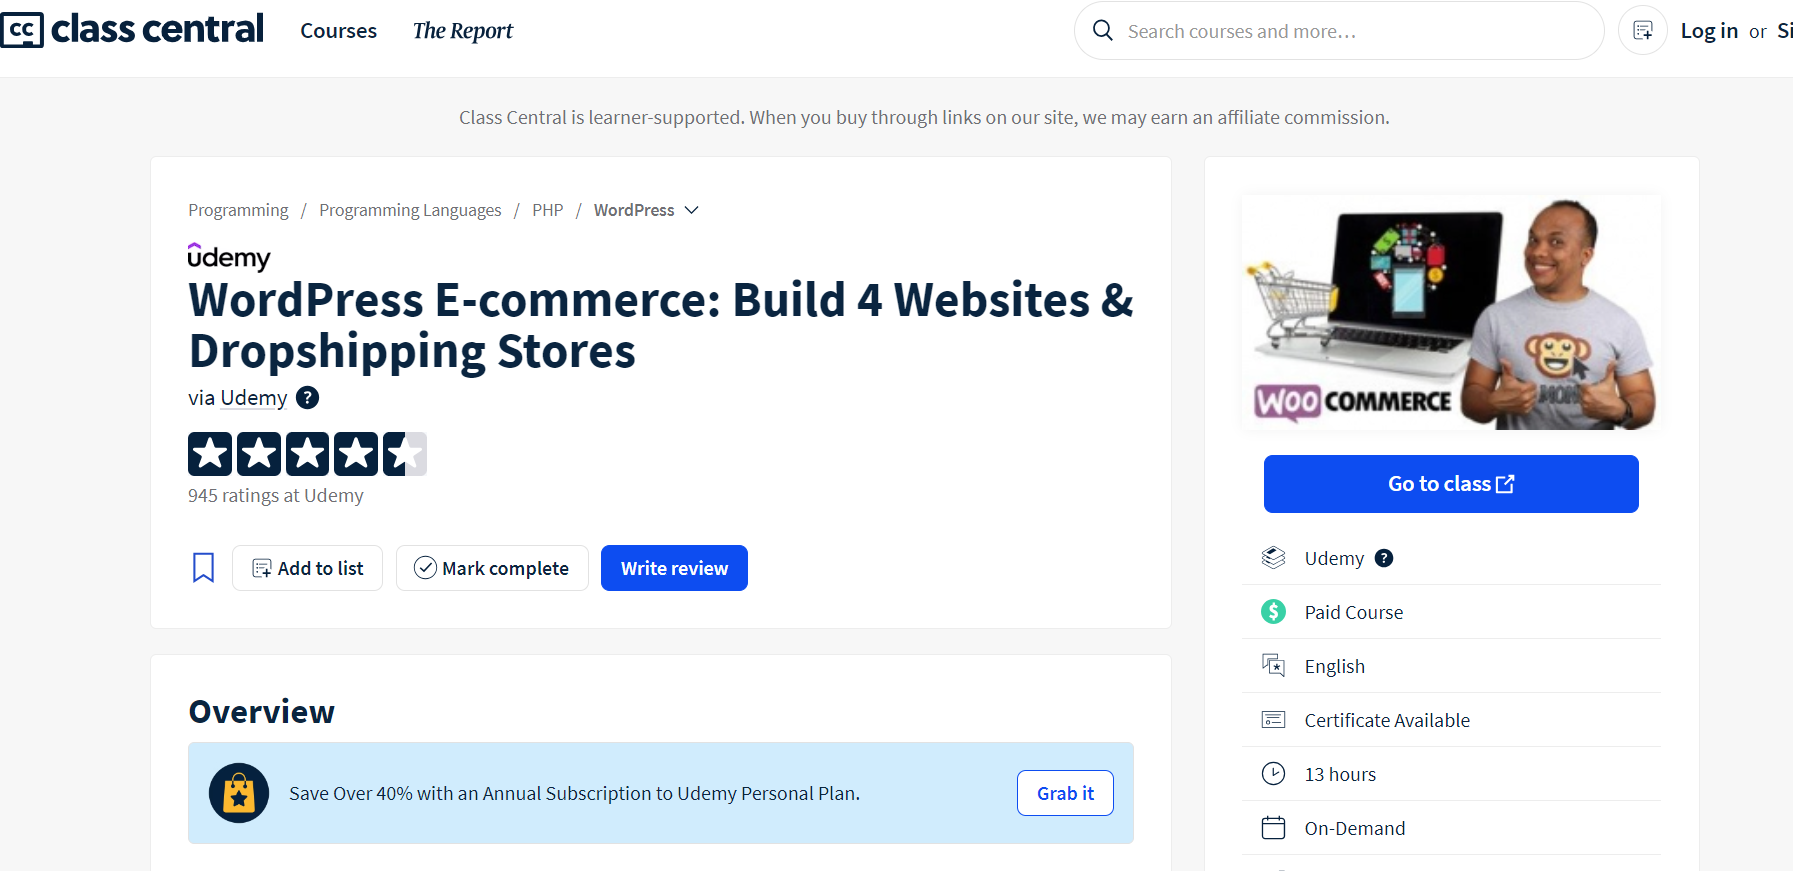 WordPress E-commerce: Build 4 Websites & Dropshipping Stores This course requires no prior coding experience and is designed to help you set up a fully functional dropshipping business on WordPress.